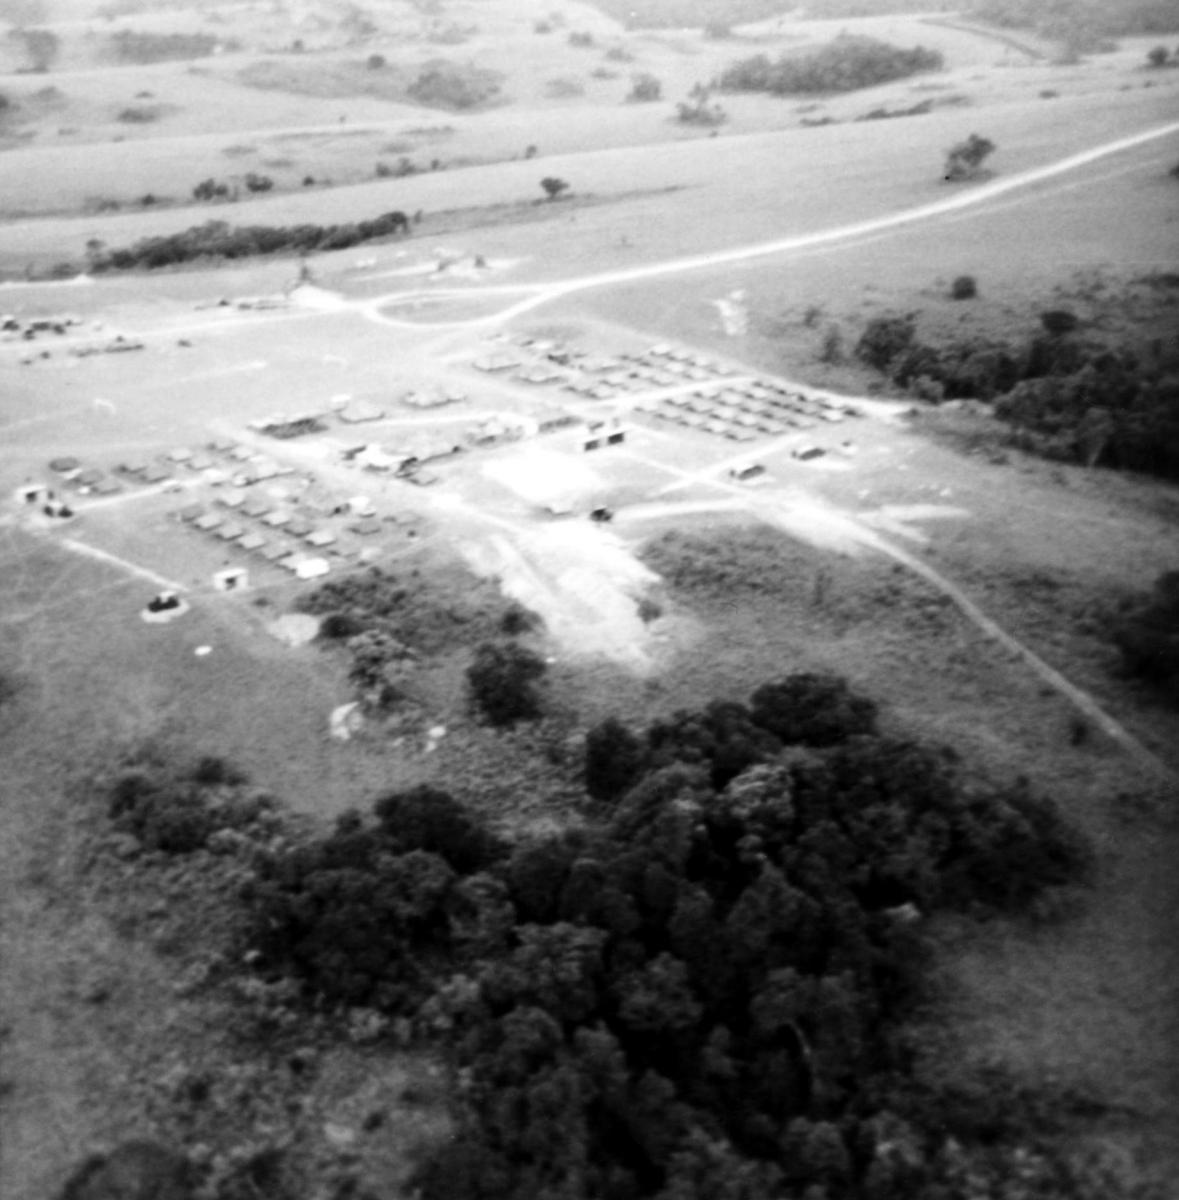 Camp from the air on the Nyika Plateau Malawi 1972